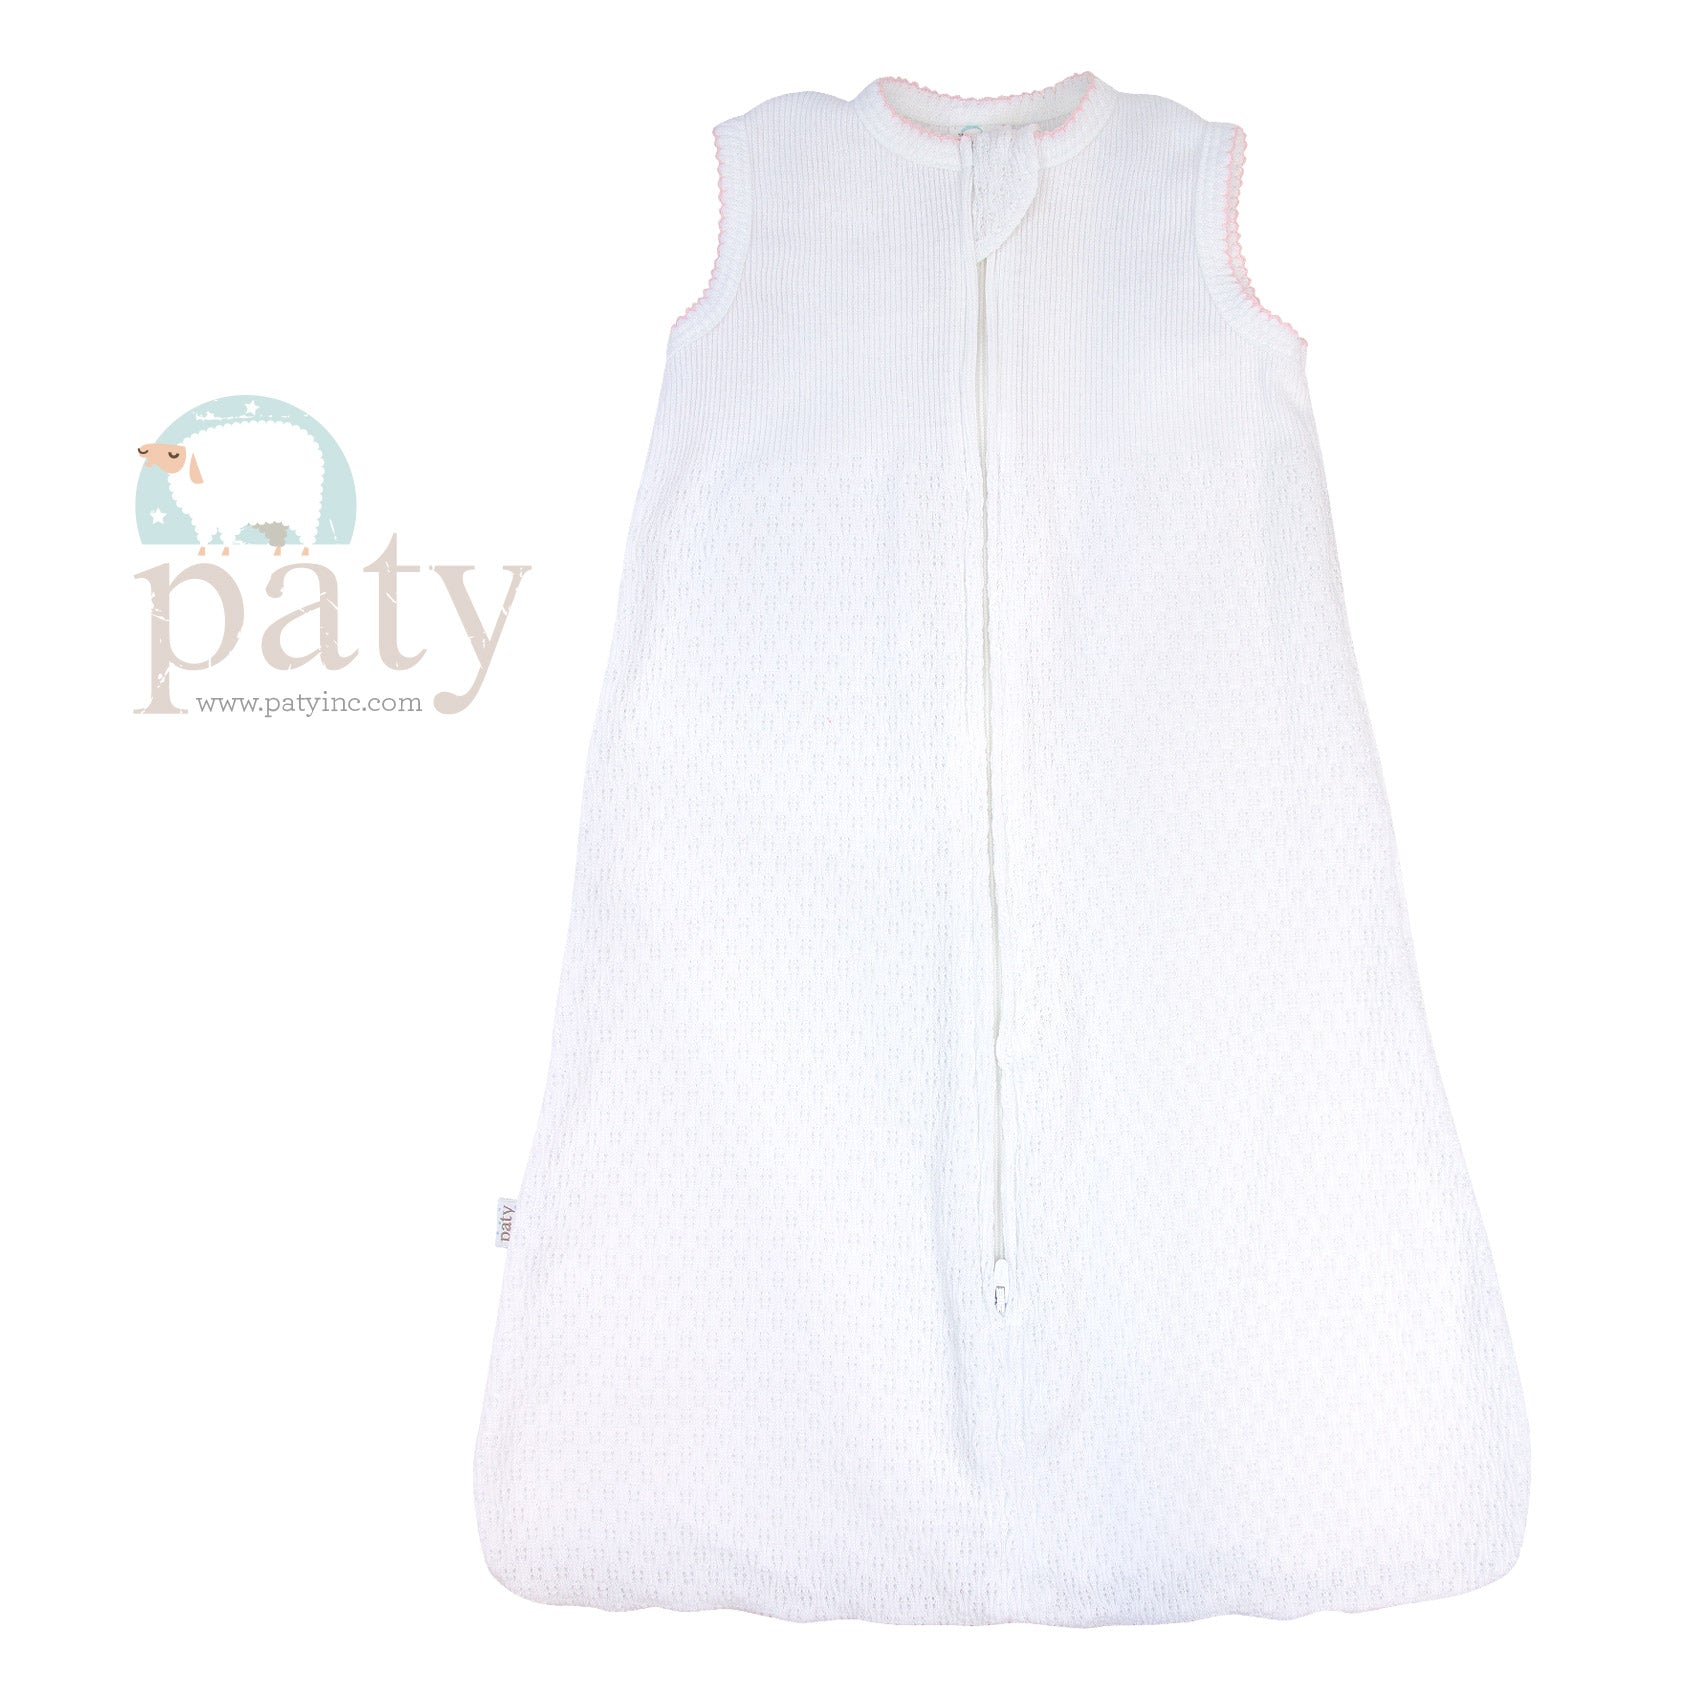 White Paty Swaddle Gown